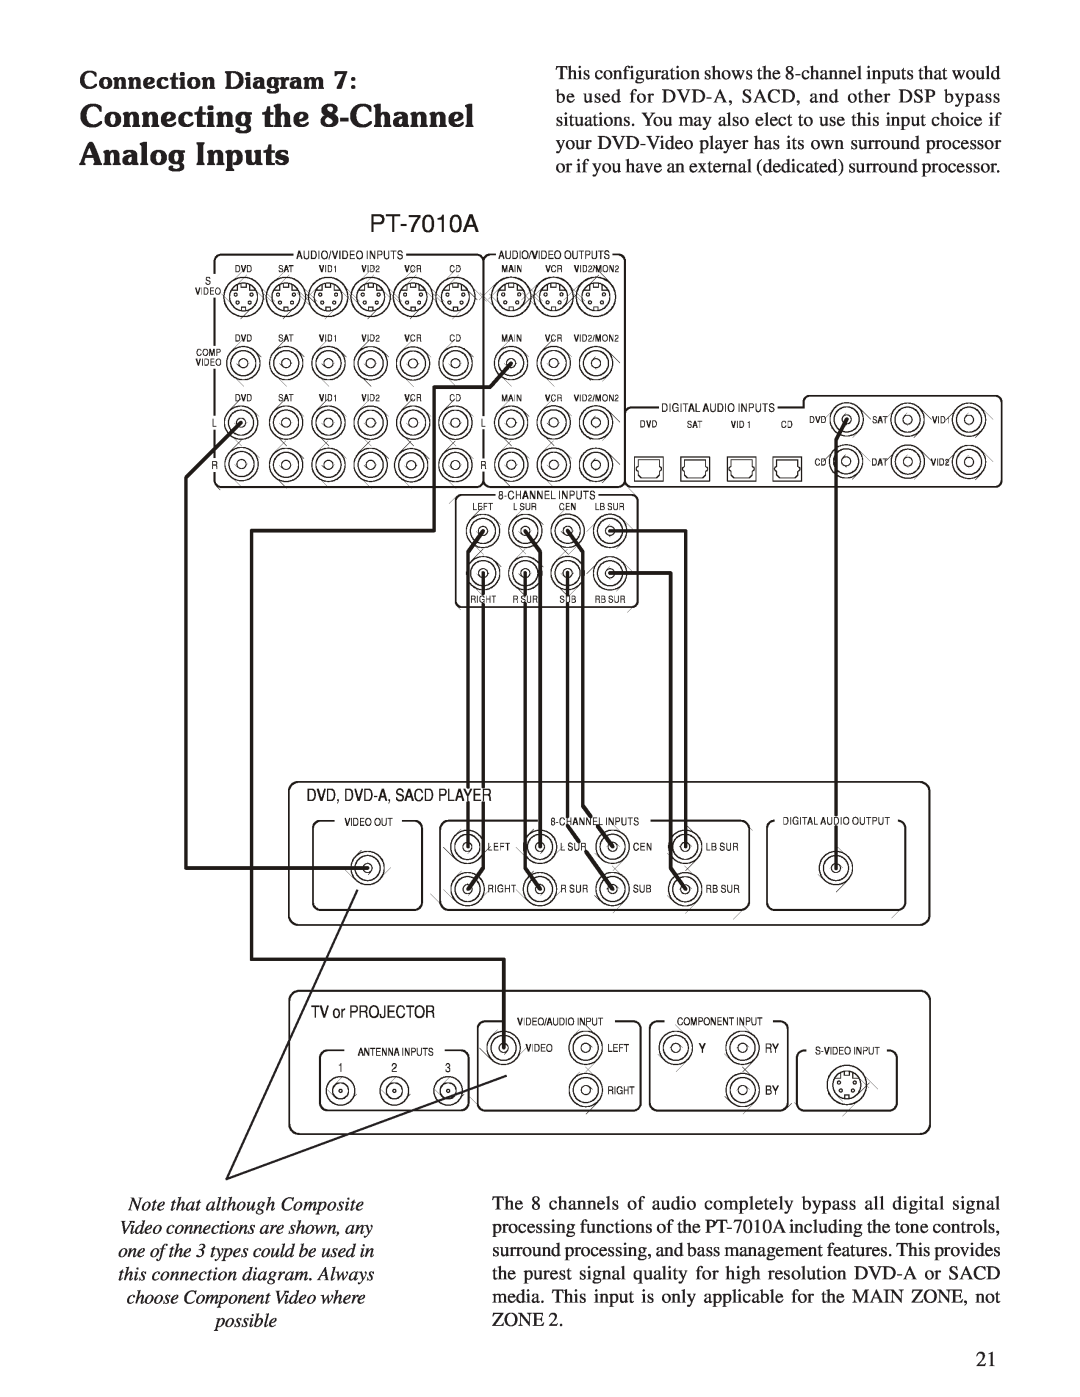 Sherbourn Technologies PT-7010A owner manual Connecting the 8-ChannelAnalog Inputs, Connection Diagram, possible 